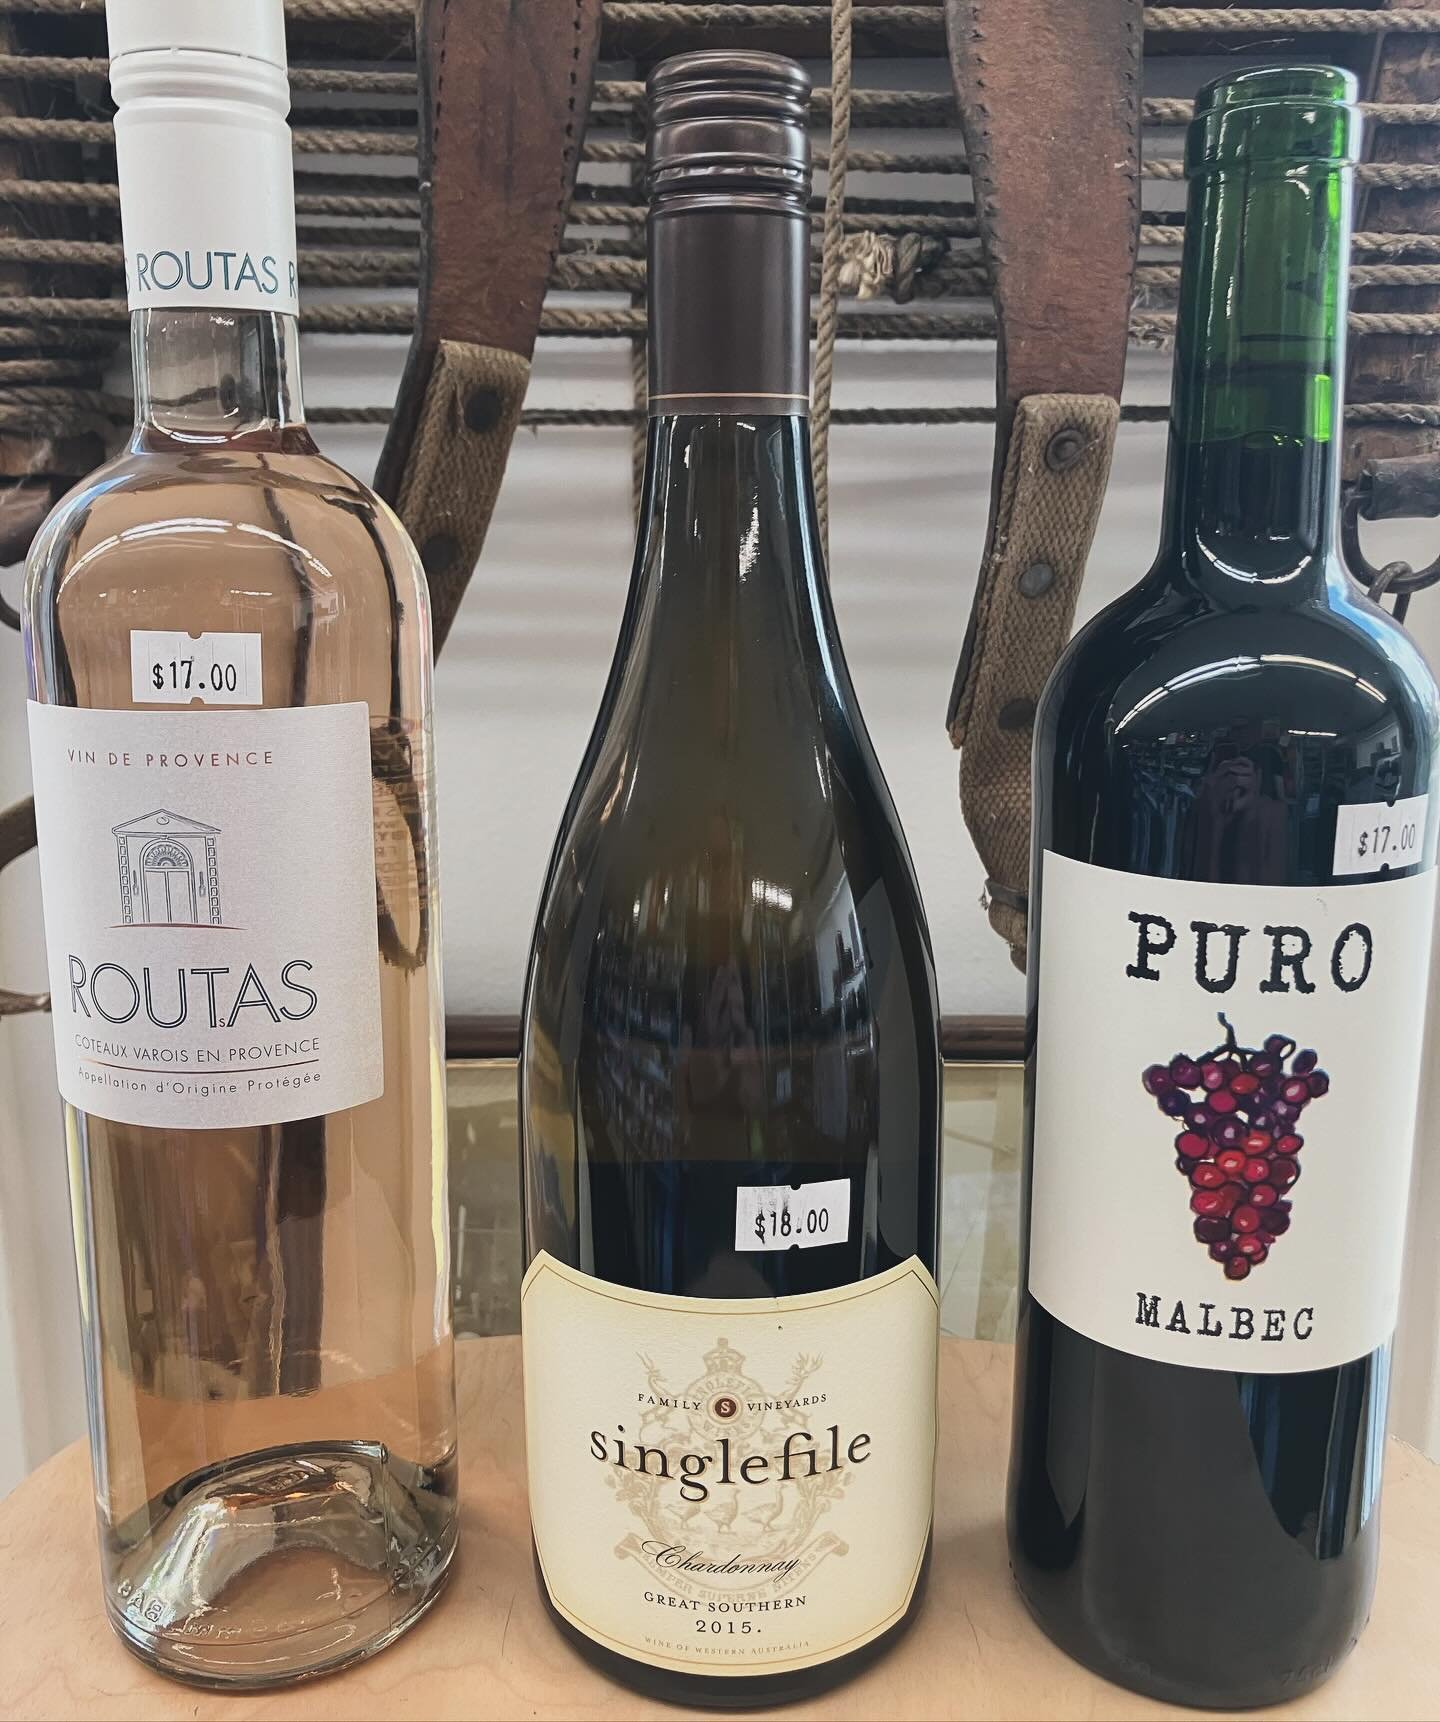 This week we&rsquo;re tasting out more tasty - and great value - wines for your sunny weekend! Come by Corner Pour Wine Tasting with Clark, Thursday from 5-7:30pm. 

#naturalwine #winetasting #highlandpark #cornerstore #westseattle